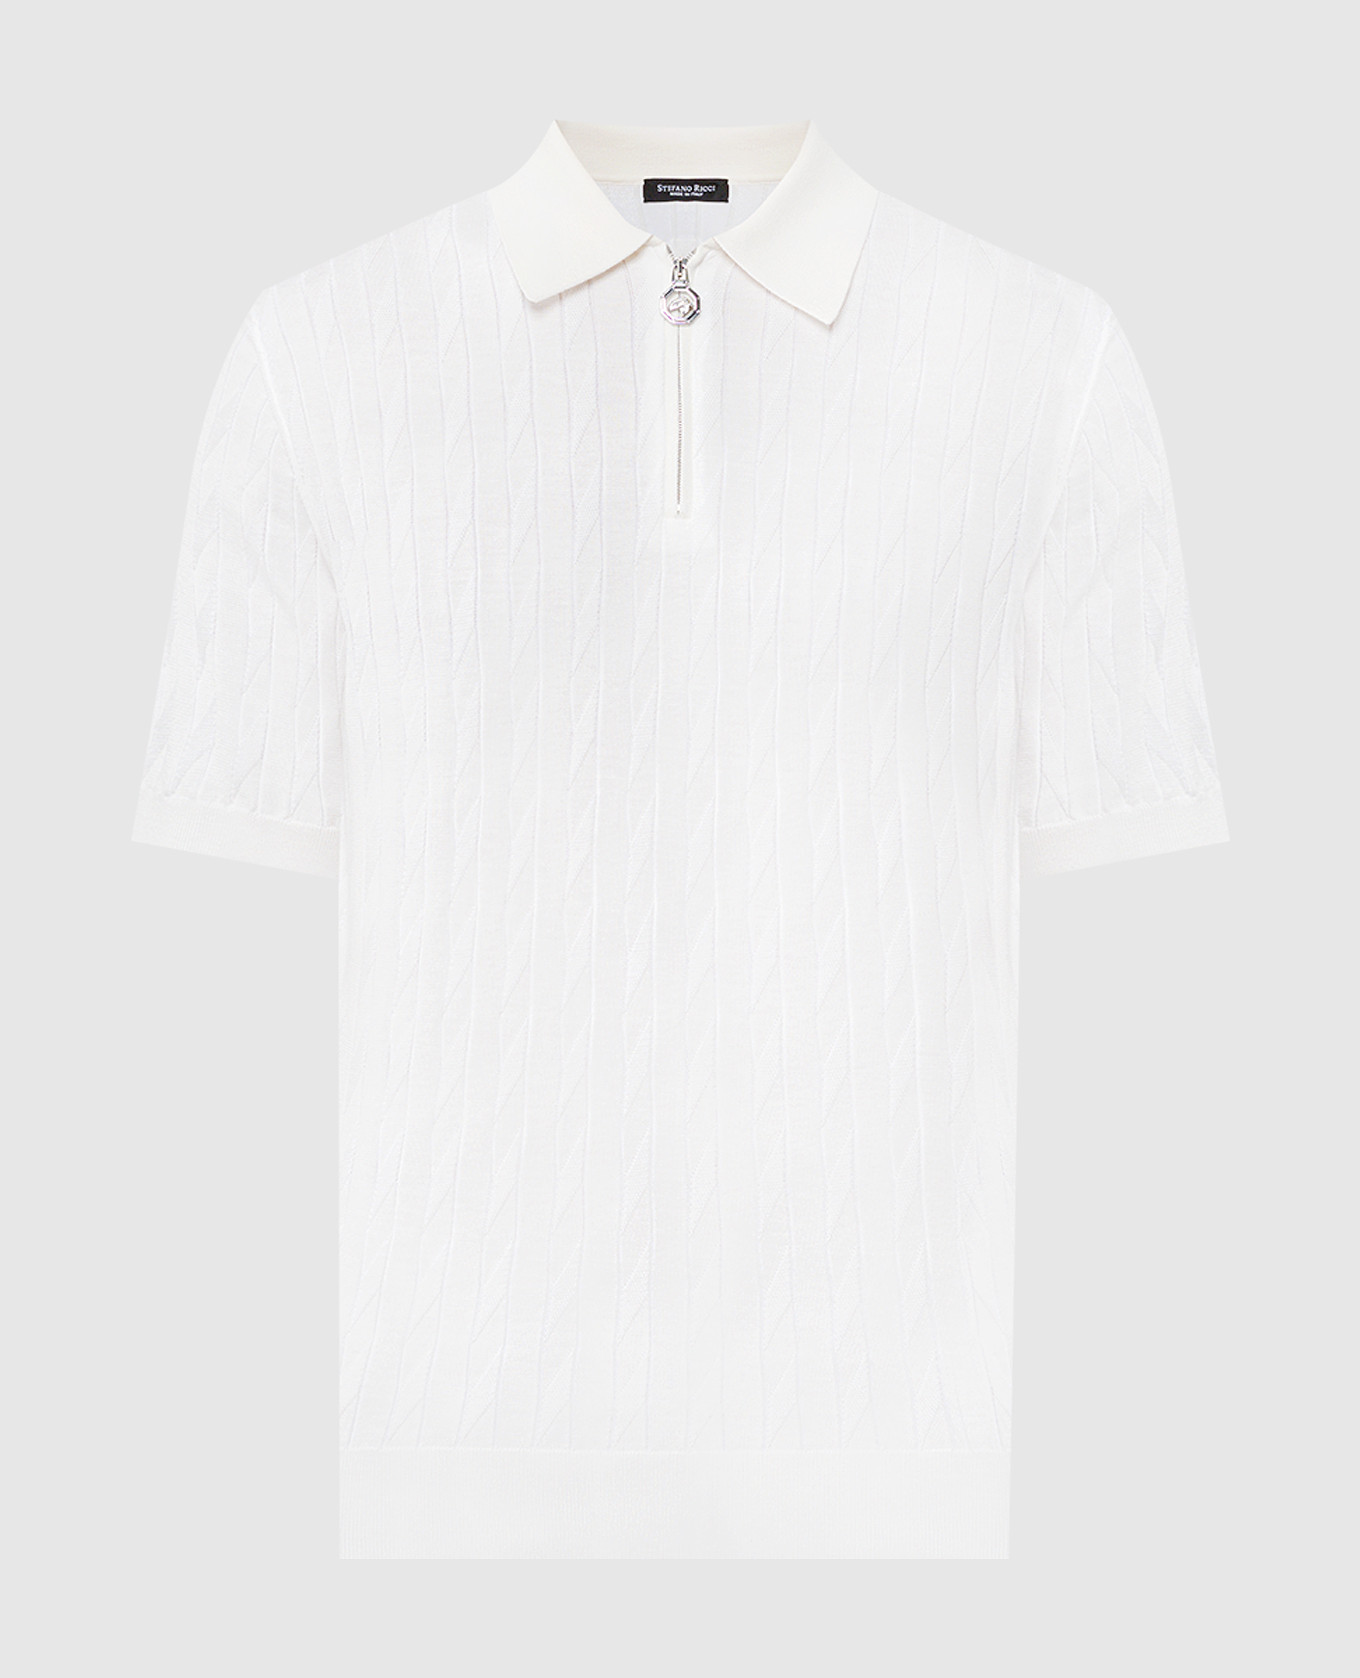 White polo with silk in a textured pattern with a logo